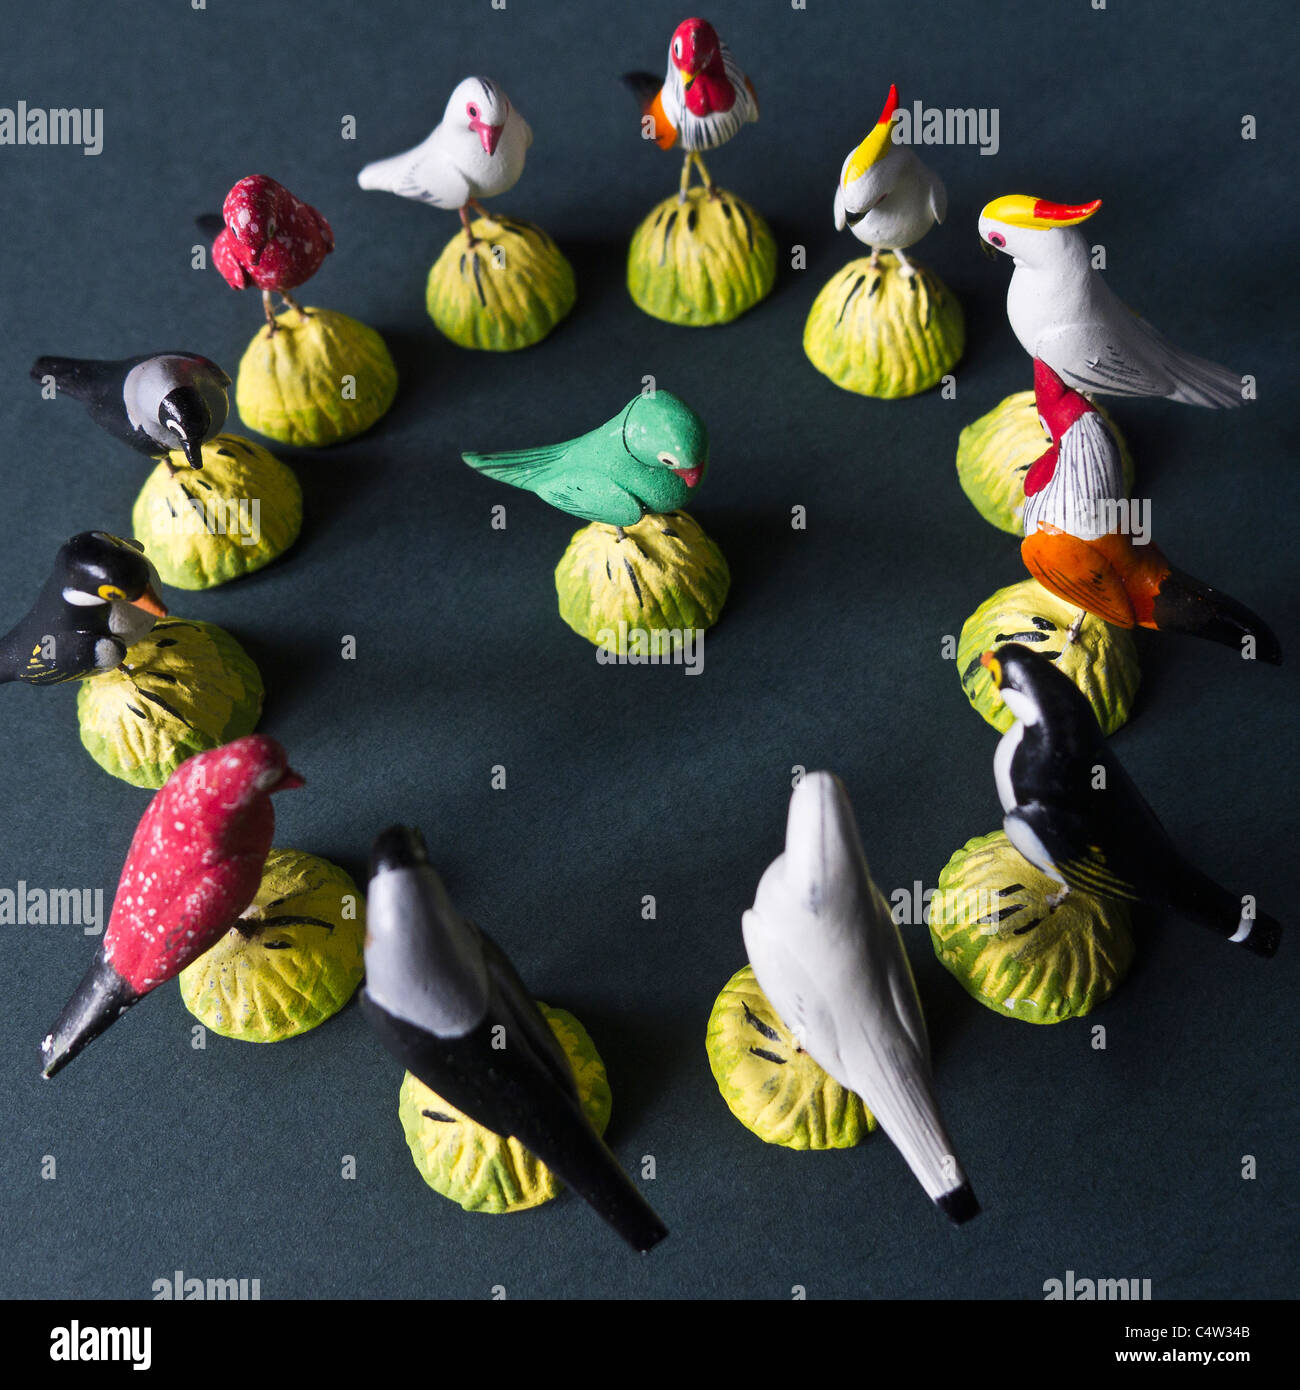 Miniature models of birds arranged in a circle with one in the centre. Stock Photo